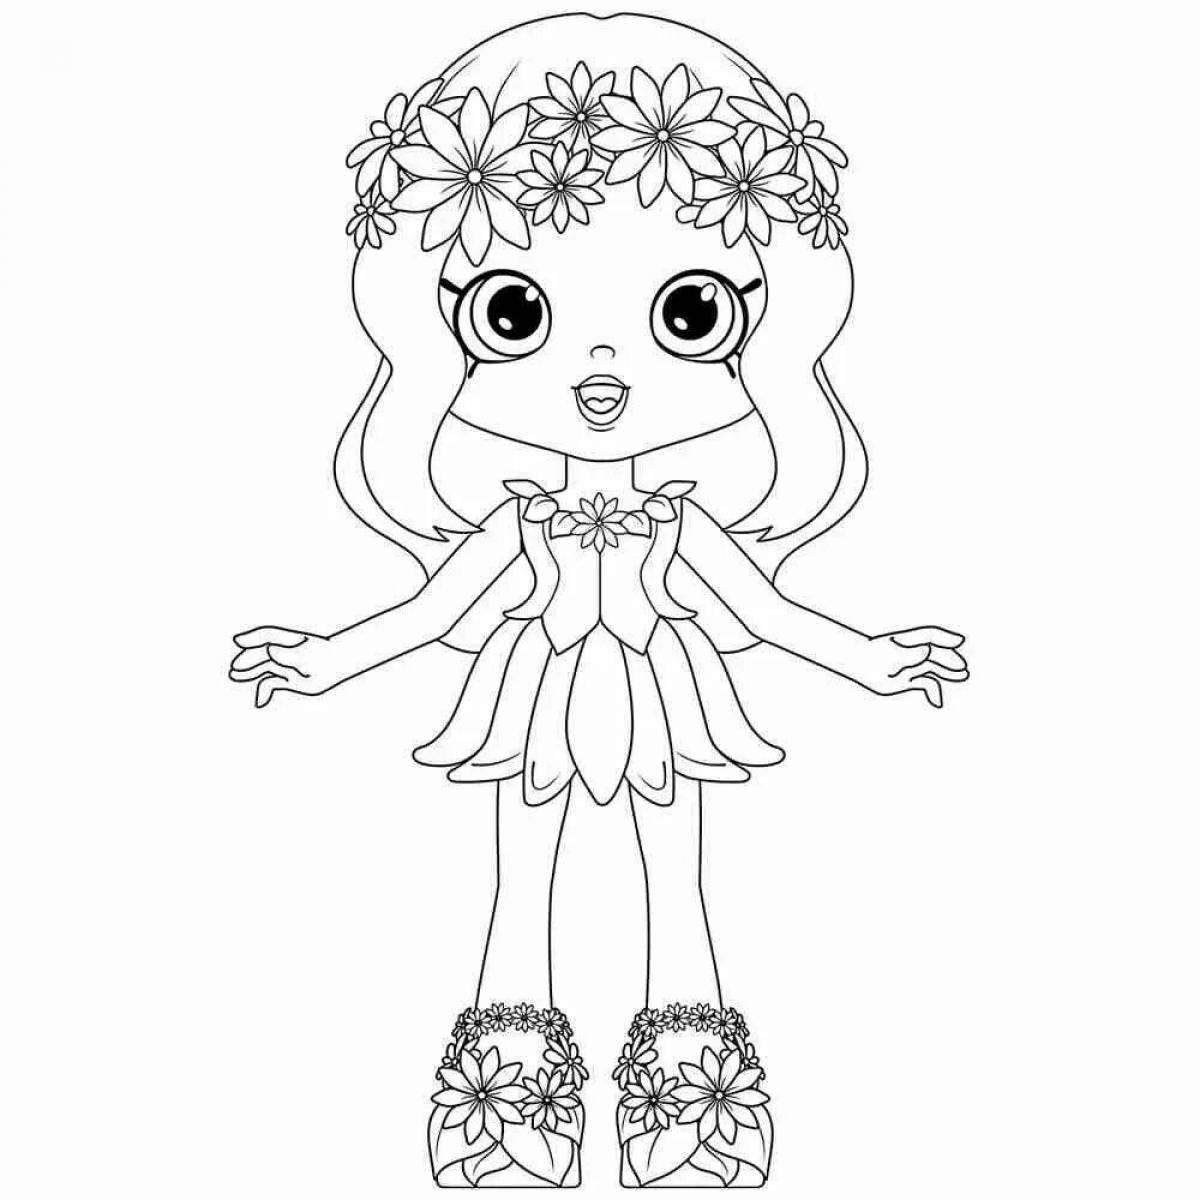 Amazing doll coloring page